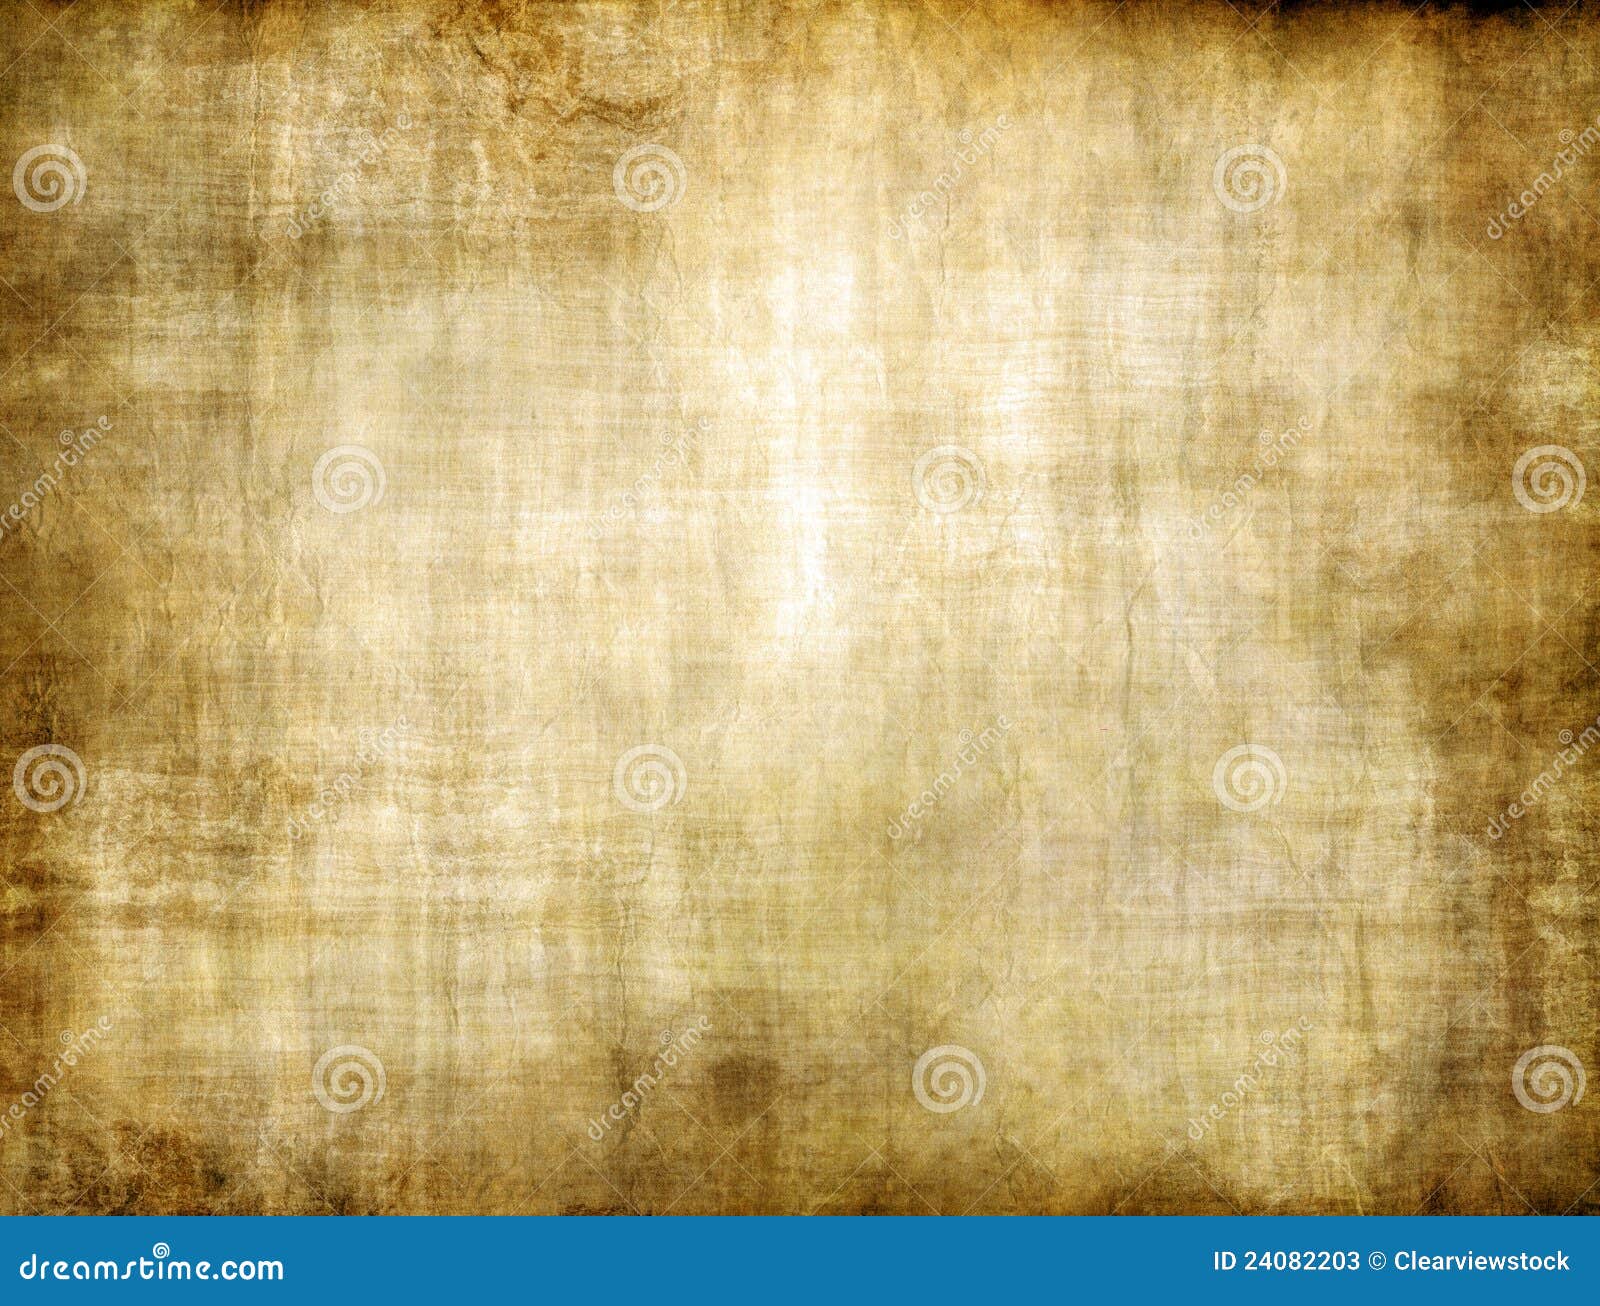 Old Yellow Brown Vintage Parchment Paper Texture Stock Illustration -  Illustration of parchment, historic: 24082203